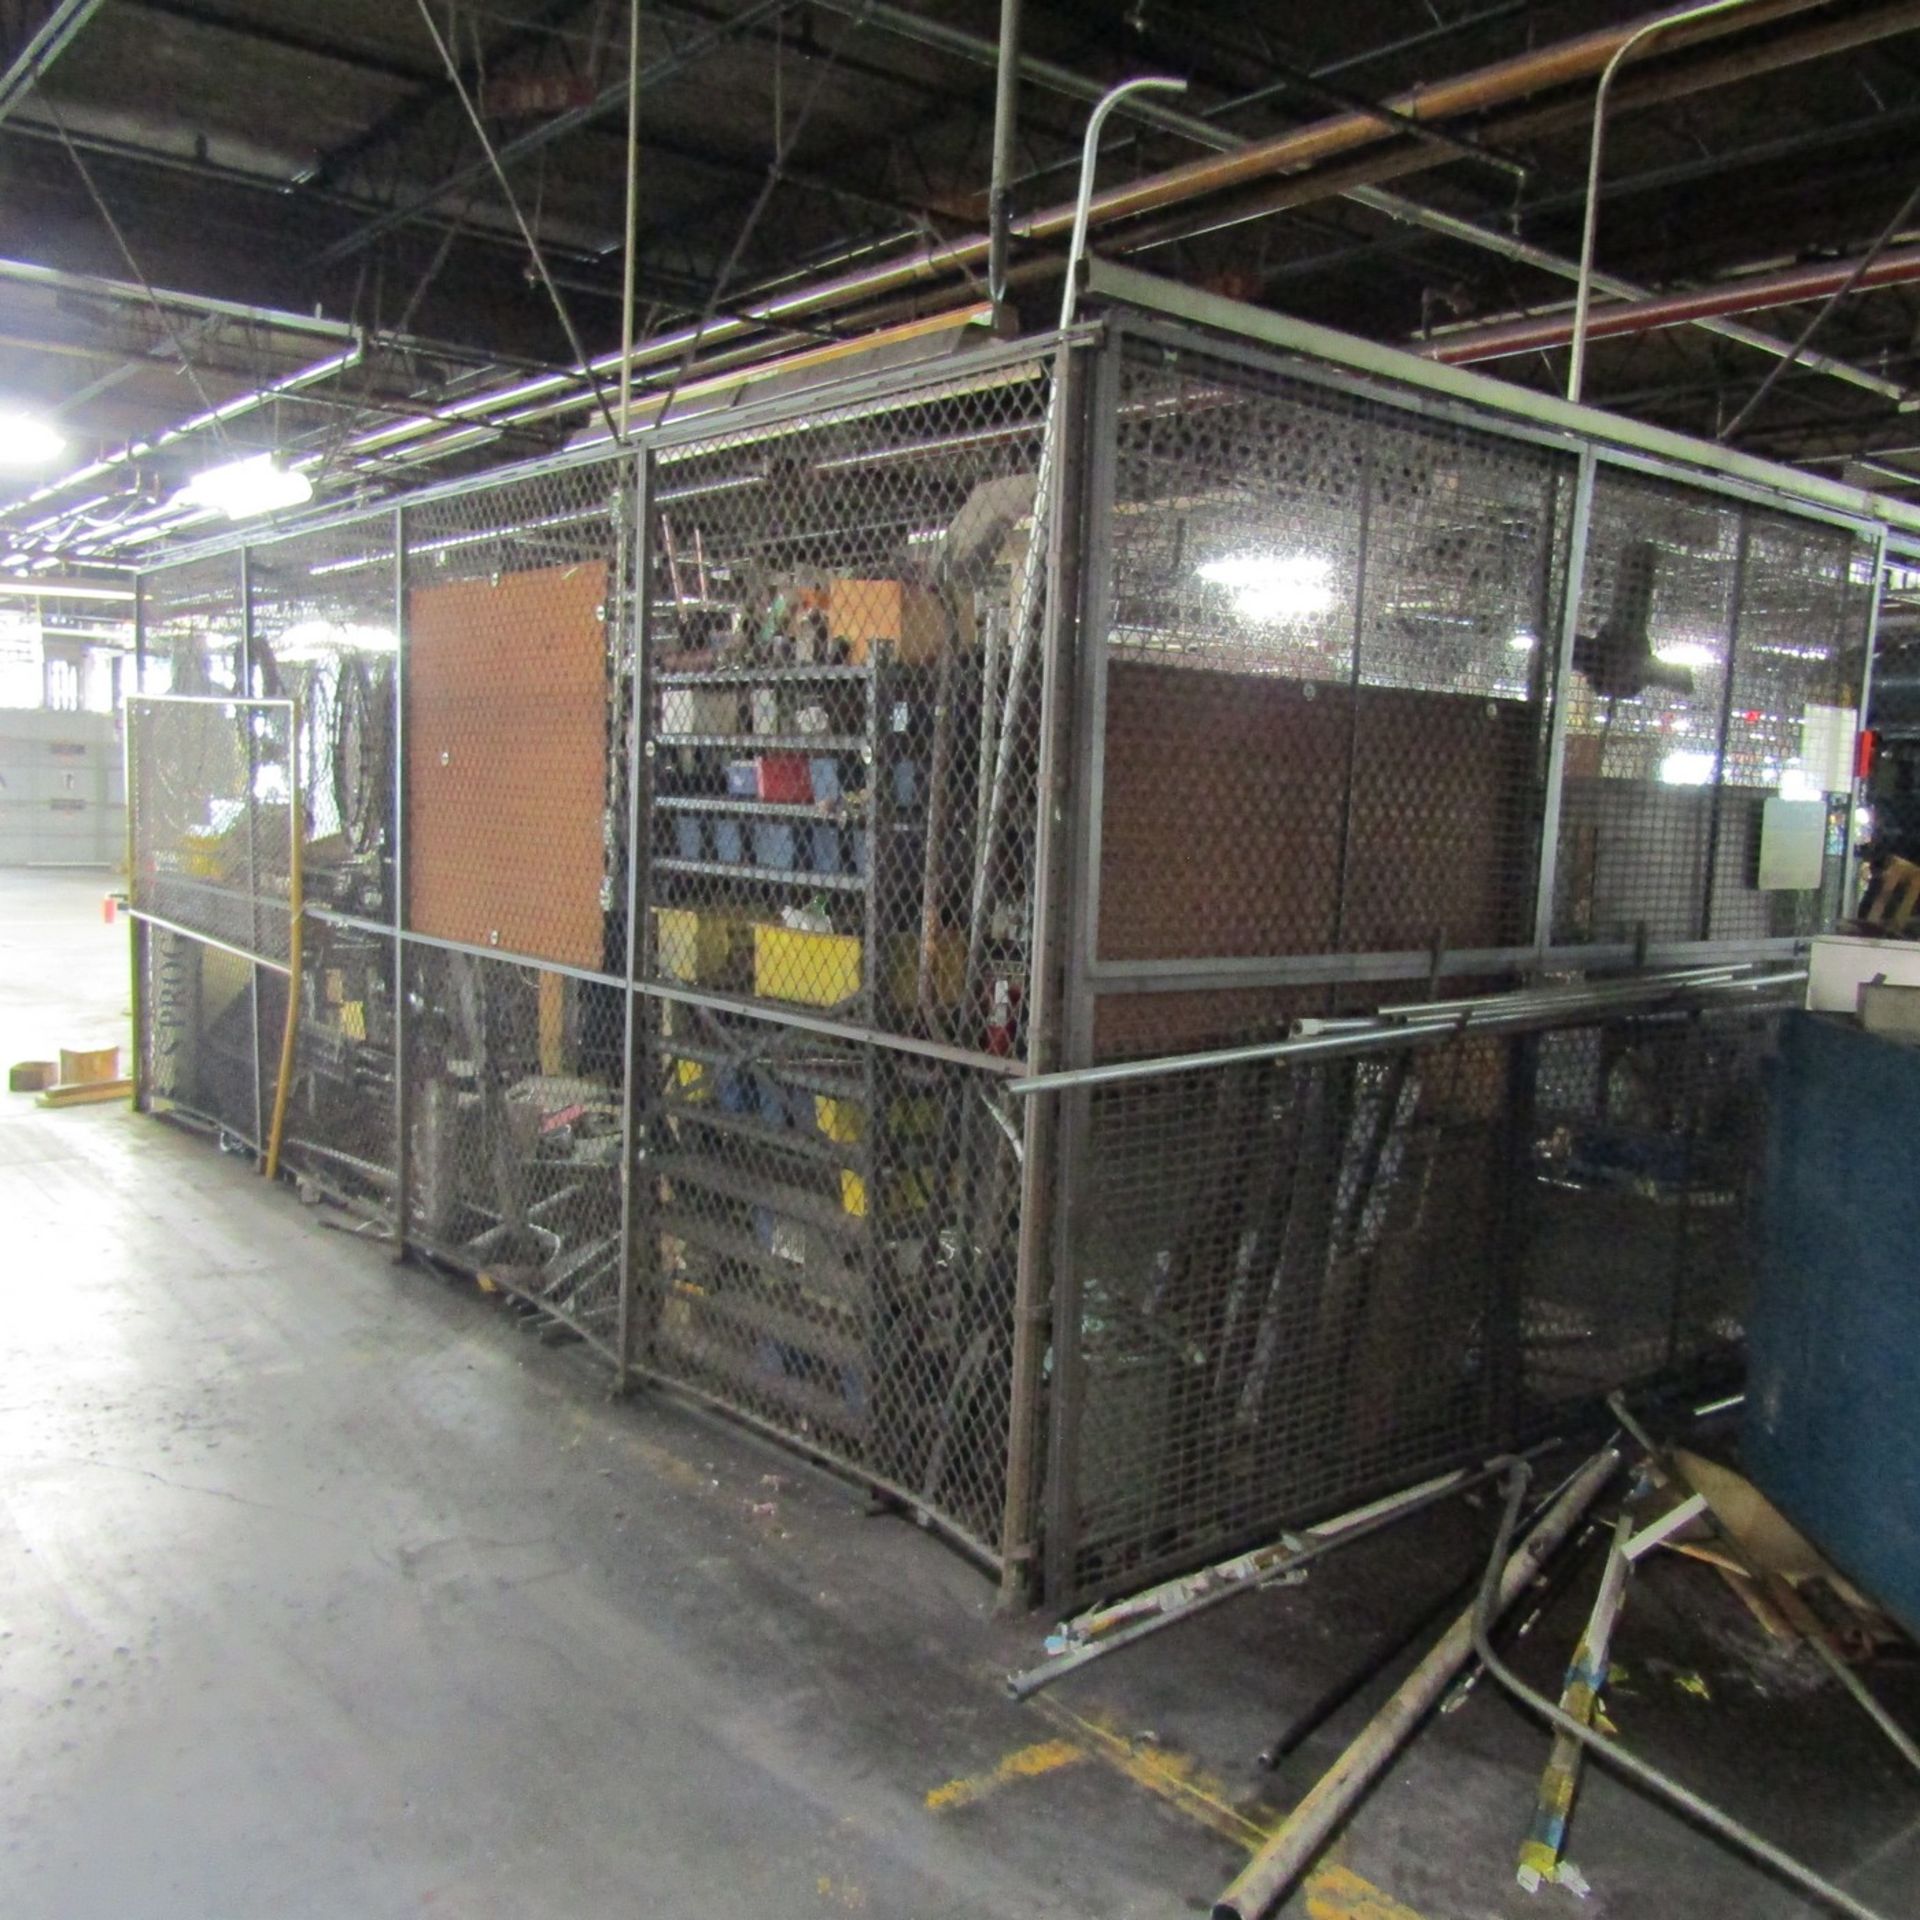 Lot - Tool Crib Fence with Contents to Include: Shelving Units, Cabinet, Belts, Hoses, Etc - Image 3 of 7